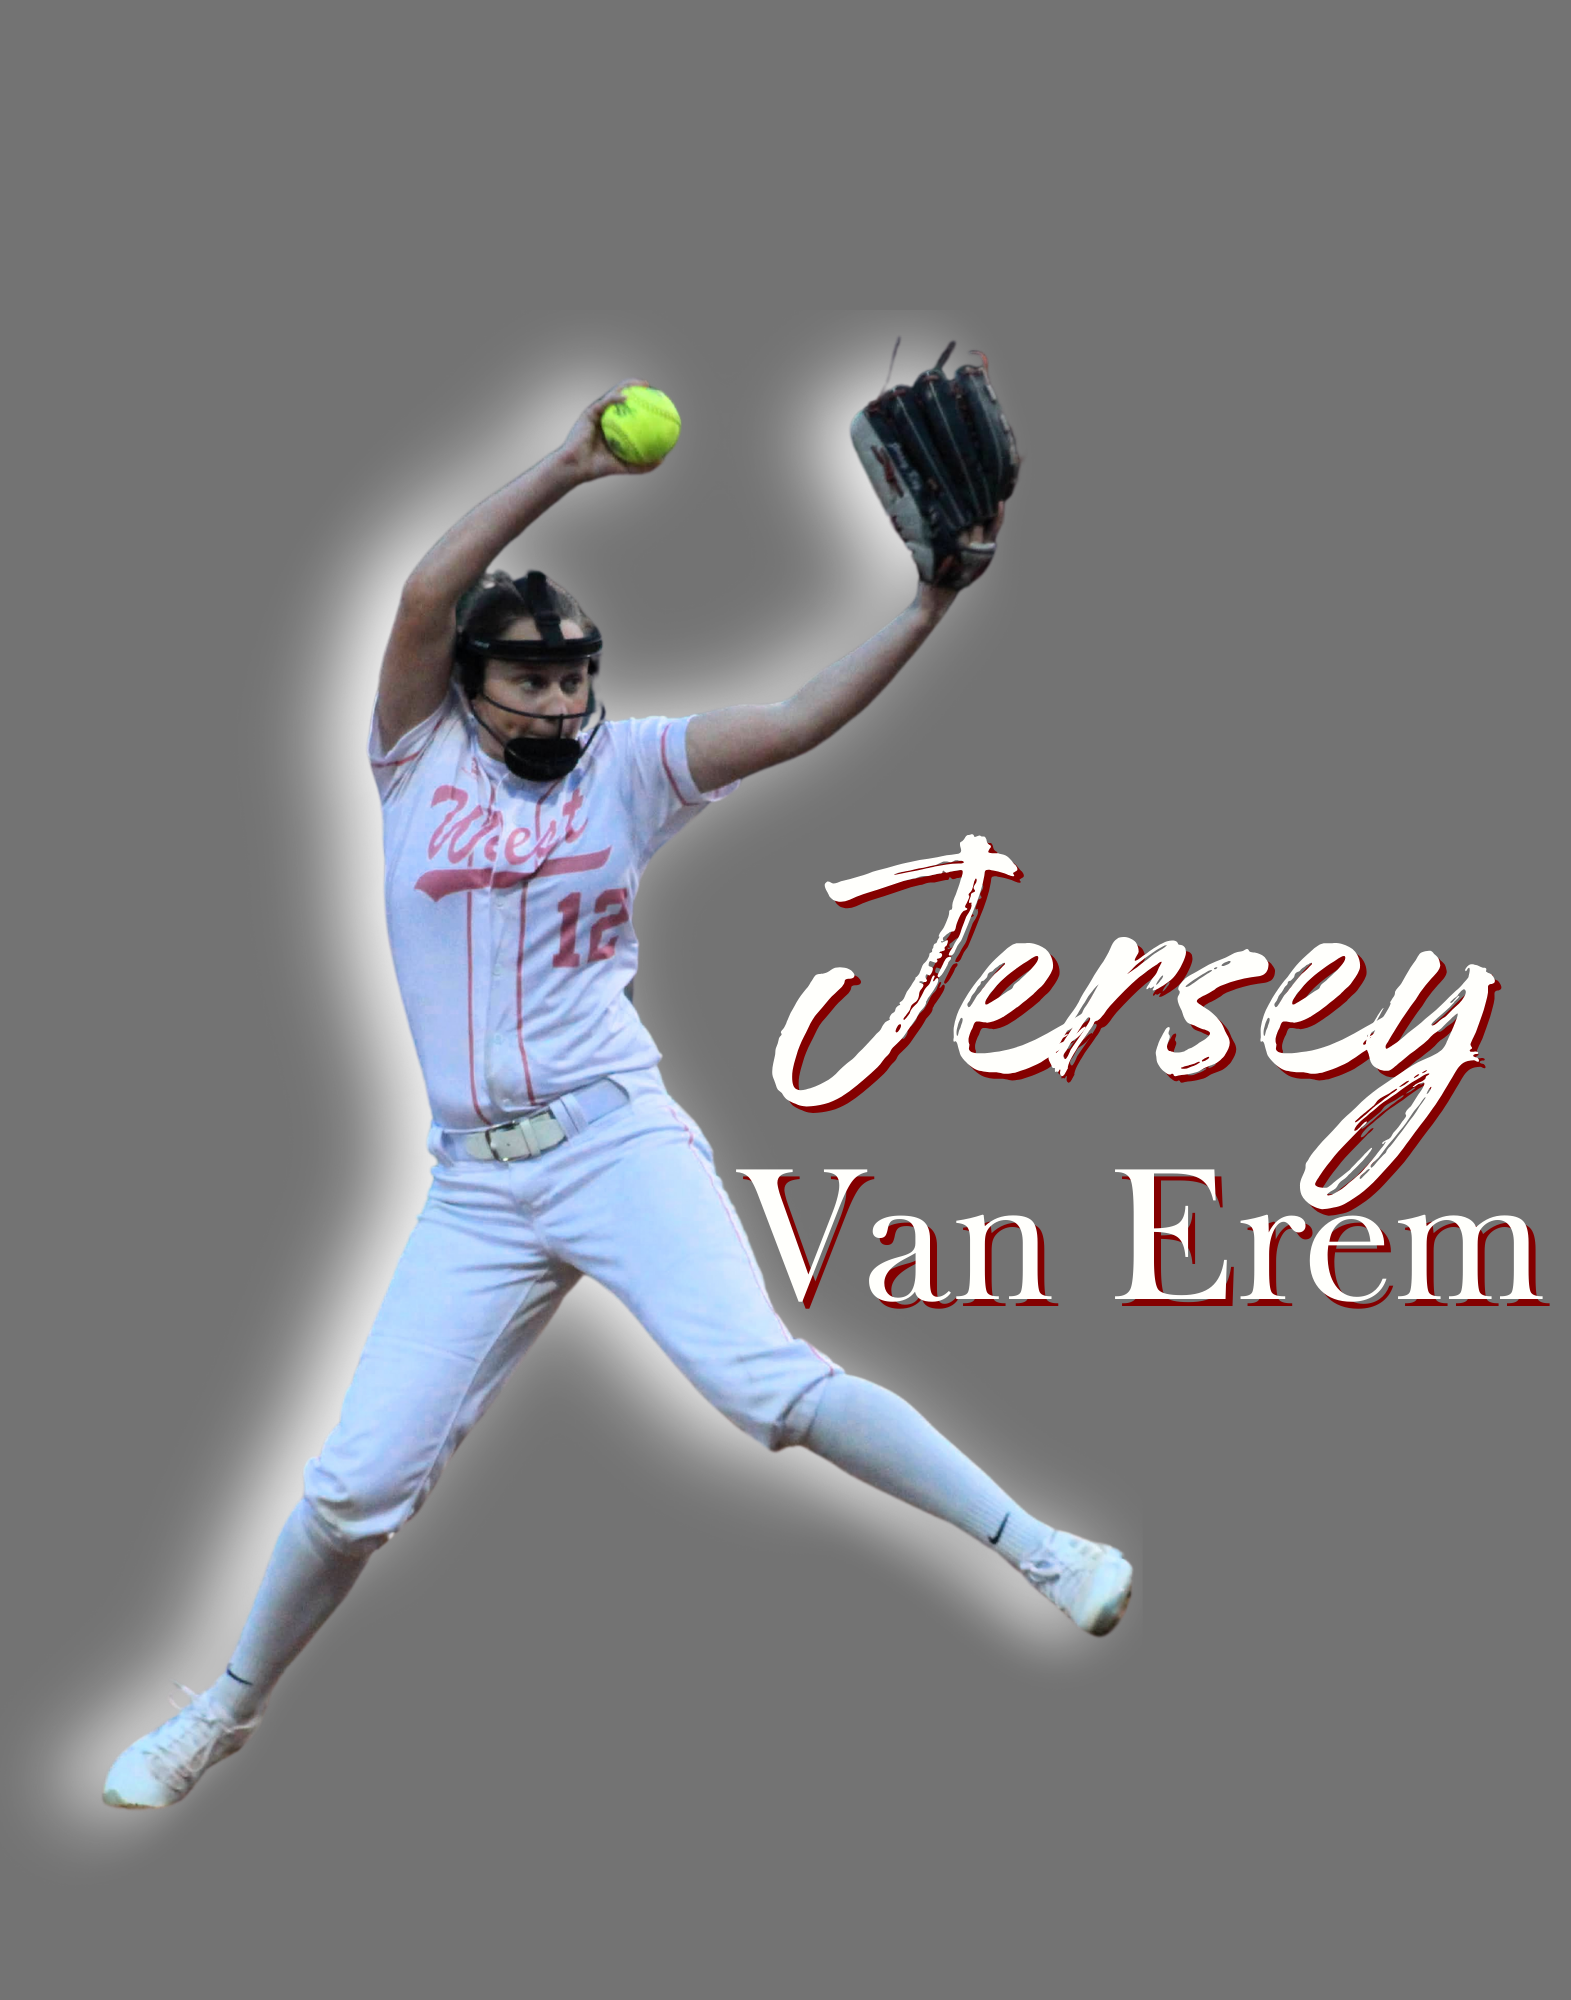 Senior Jersey Van Erem plans to attend Quincey University to play softball.